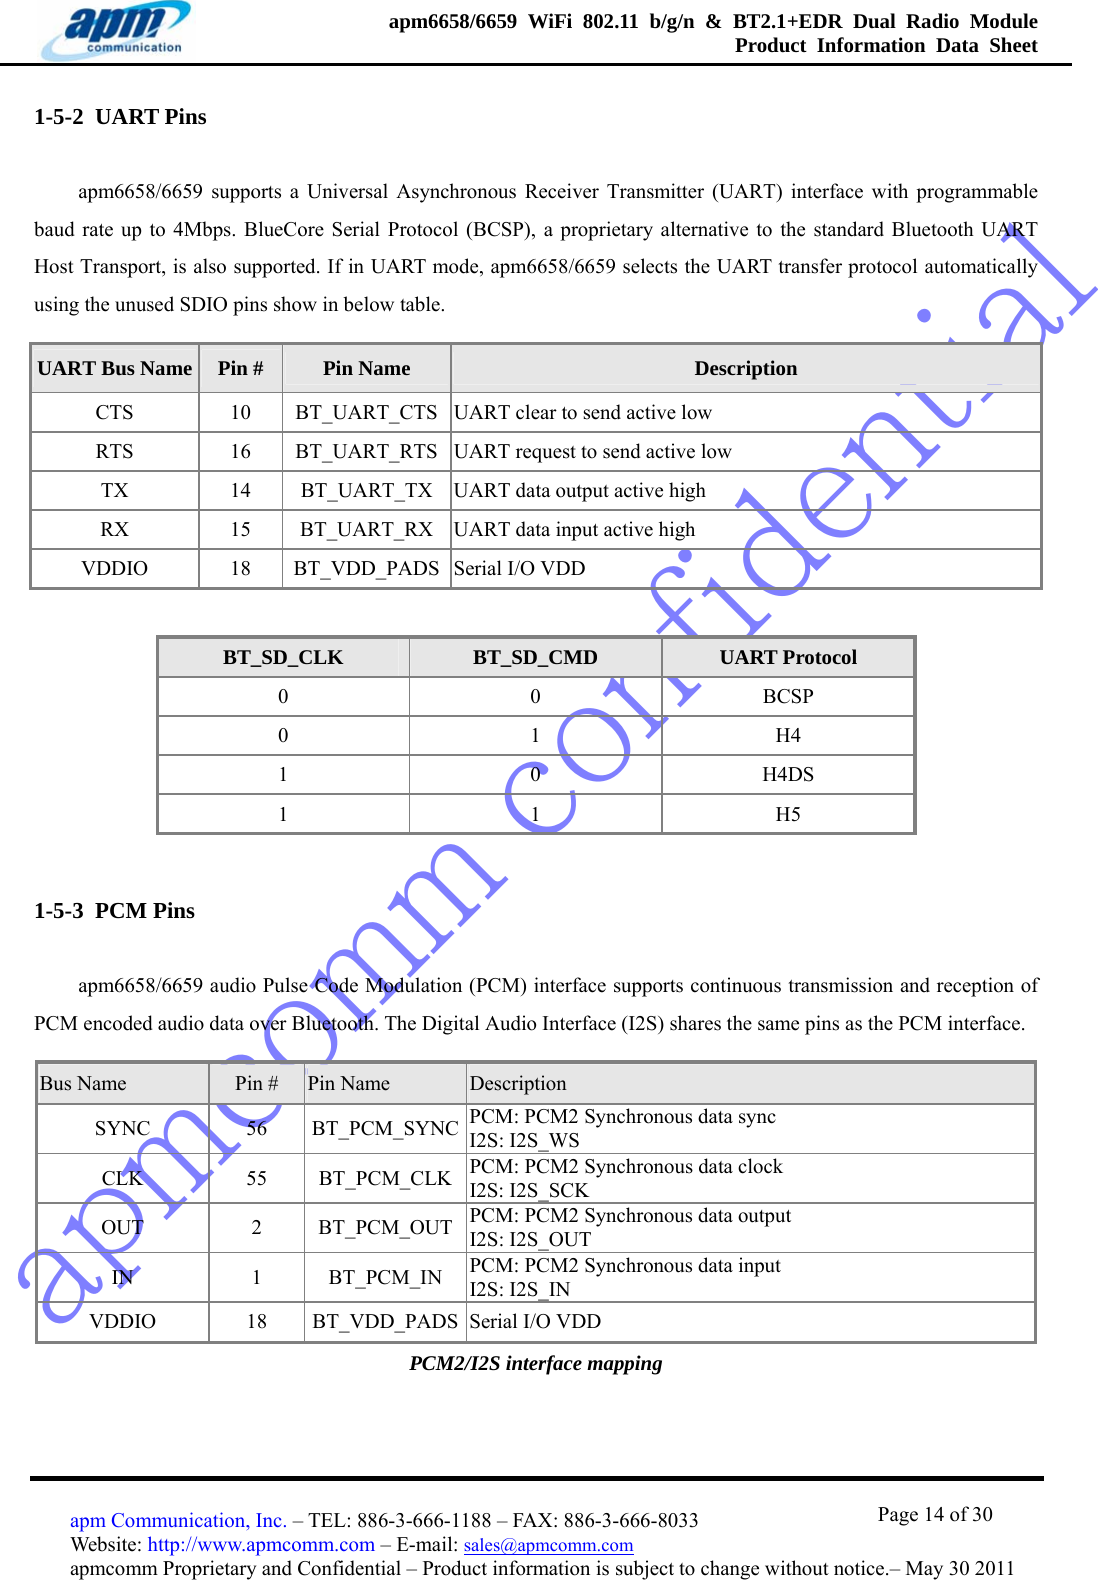 apmcomm confidentialapm6658/6659 WiFi 802.11 b/g/n &amp; BT2.1+EDR Dual Radio Module  Product Information Data Sheet                                       Page 14 of 30 apm Communication, Inc. – TEL: 886-3-666-1188 – FAX: 886-3-666-8033 Website: http://www.apmcomm.com – E-mail: sales@apmcomm.com  apmcomm Proprietary and Confidential – Product information is subject to change without notice.– May 30 2011 1-5-2  UART Pins apm6658/6659 supports a Universal Asynchronous Receiver Transmitter (UART) interface with programmable baud rate up to 4Mbps. BlueCore Serial Protocol (BCSP), a proprietary alternative to the standard Bluetooth UART Host Transport, is also supported. If in UART mode, apm6658/6659 selects the UART transfer protocol automatically using the unused SDIO pins show in below table.   UART Bus Name  Pin #  Pin Name  Description CTS 10 BT_UART_CTS UART clear to send active low RTS 16 BT_UART_RTS UART request to send active low TX 14 BT_UART_TX UART data output active high RX 15 BT_UART_RX UART data input active high VDDIO  18  BT_VDD_PADS Serial I/O VDD  BT_SD_CLK  BT_SD_CMD  UART Protocol 0 0 BCSP 0 1 H4 1 0 H4DS 1 1 H5 1-5-3  PCM Pins apm6658/6659 audio Pulse Code Modulation (PCM) interface supports continuous transmission and reception of PCM encoded audio data over Bluetooth. The Digital Audio Interface (I2S) shares the same pins as the PCM interface.   Bus Name  Pin #  Pin Name  Description SYNC 56 BT_PCM_SYNC PCM: PCM2 Synchronous data sync I2S: I2S_WS CLK 55 BT_PCM_CLK PCM: PCM2 Synchronous data clock I2S: I2S_SCK OUT 2 BT_PCM_OUT PCM: PCM2 Synchronous data output I2S: I2S_OUT IN 1 BT_PCM_IN PCM: PCM2 Synchronous data input I2S: I2S_IN VDDIO  18  BT_VDD_PADS Serial I/O VDD PCM2/I2S interface mapping 